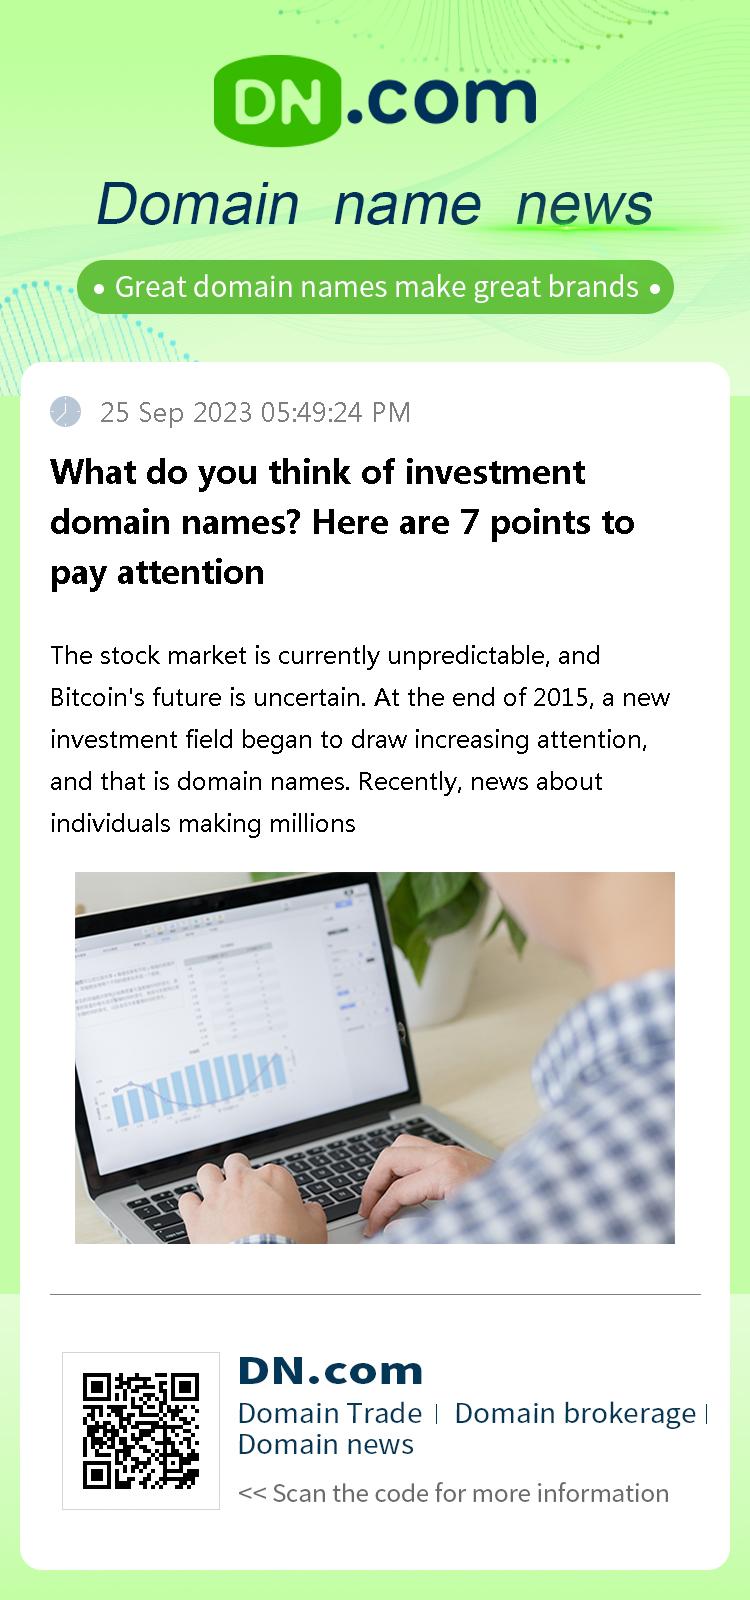 What do you think of investment domain names? Here are 7 points to pay attention